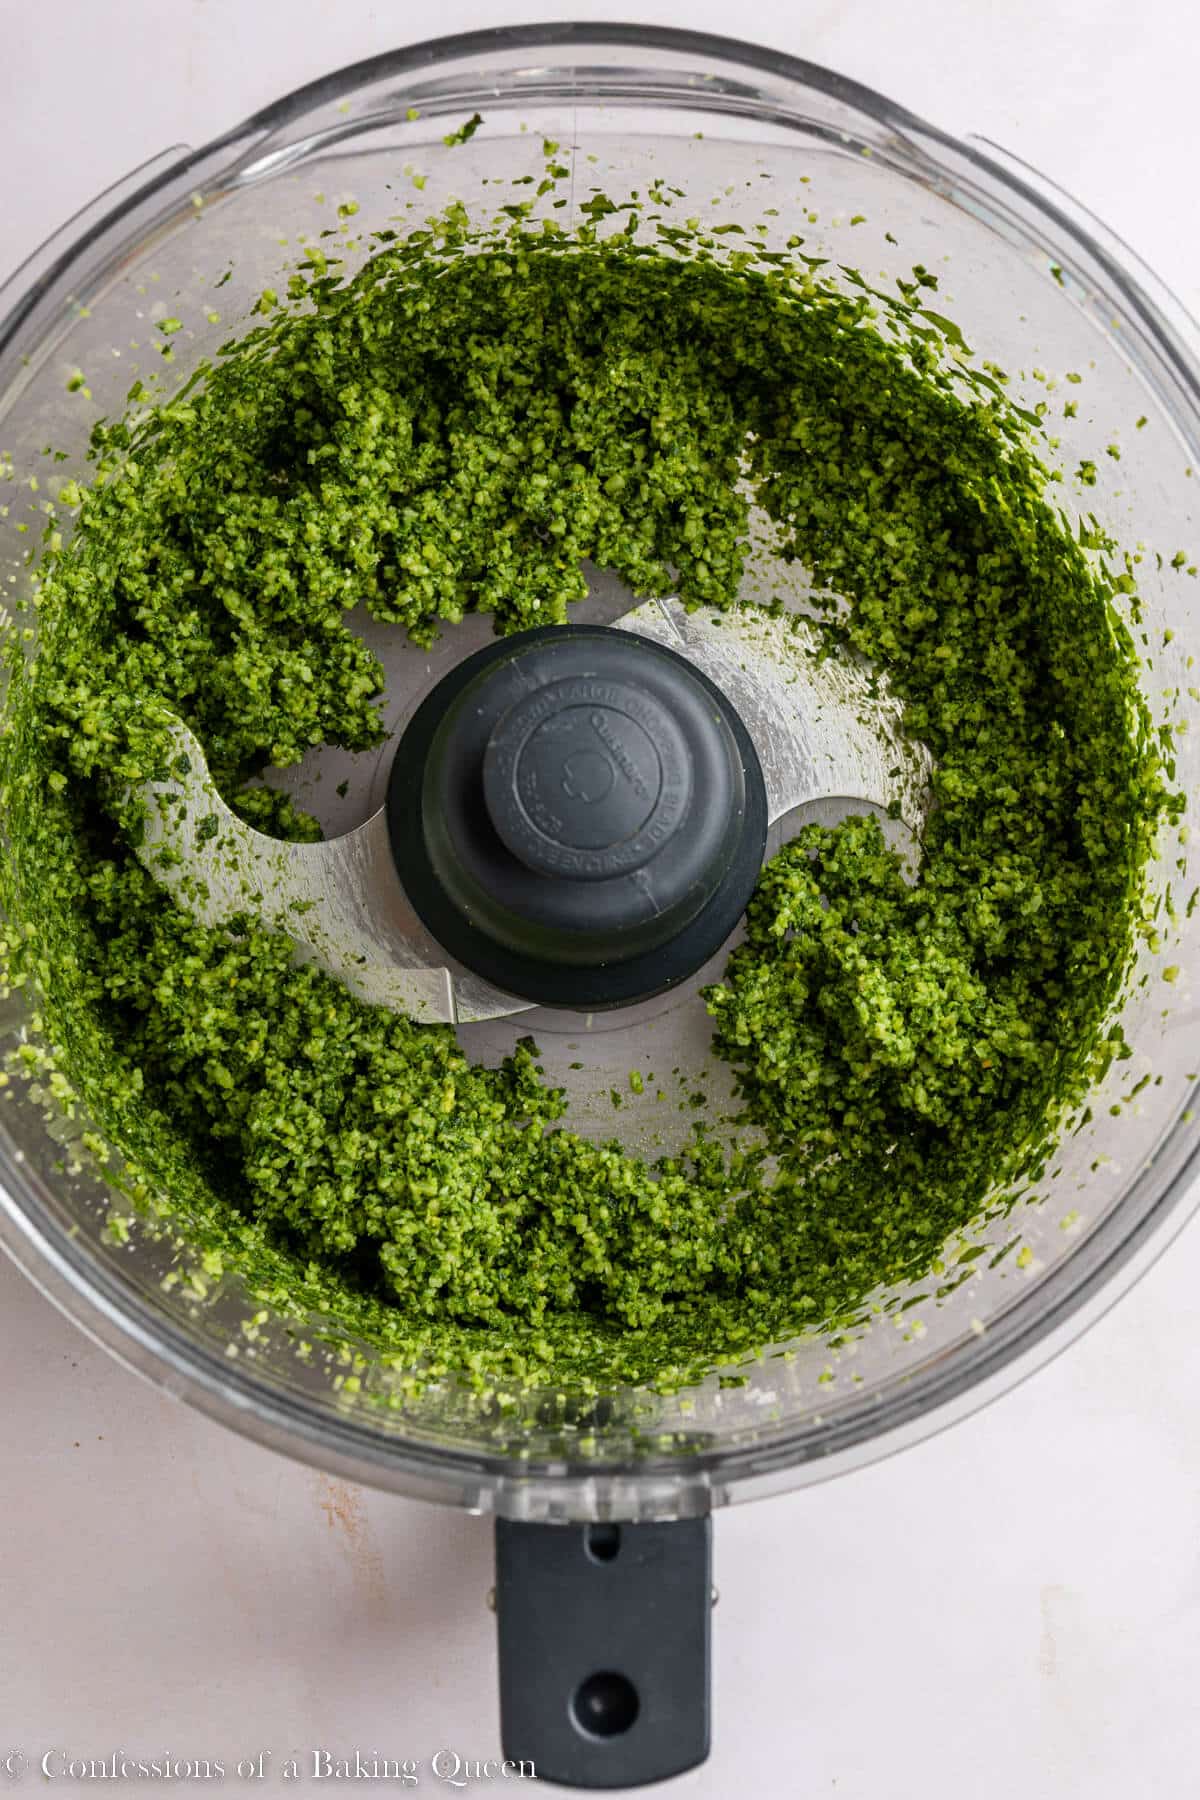 basil, pine nuts, garlic, salt, and parmsean cheese blended together in a food processor on a light surface